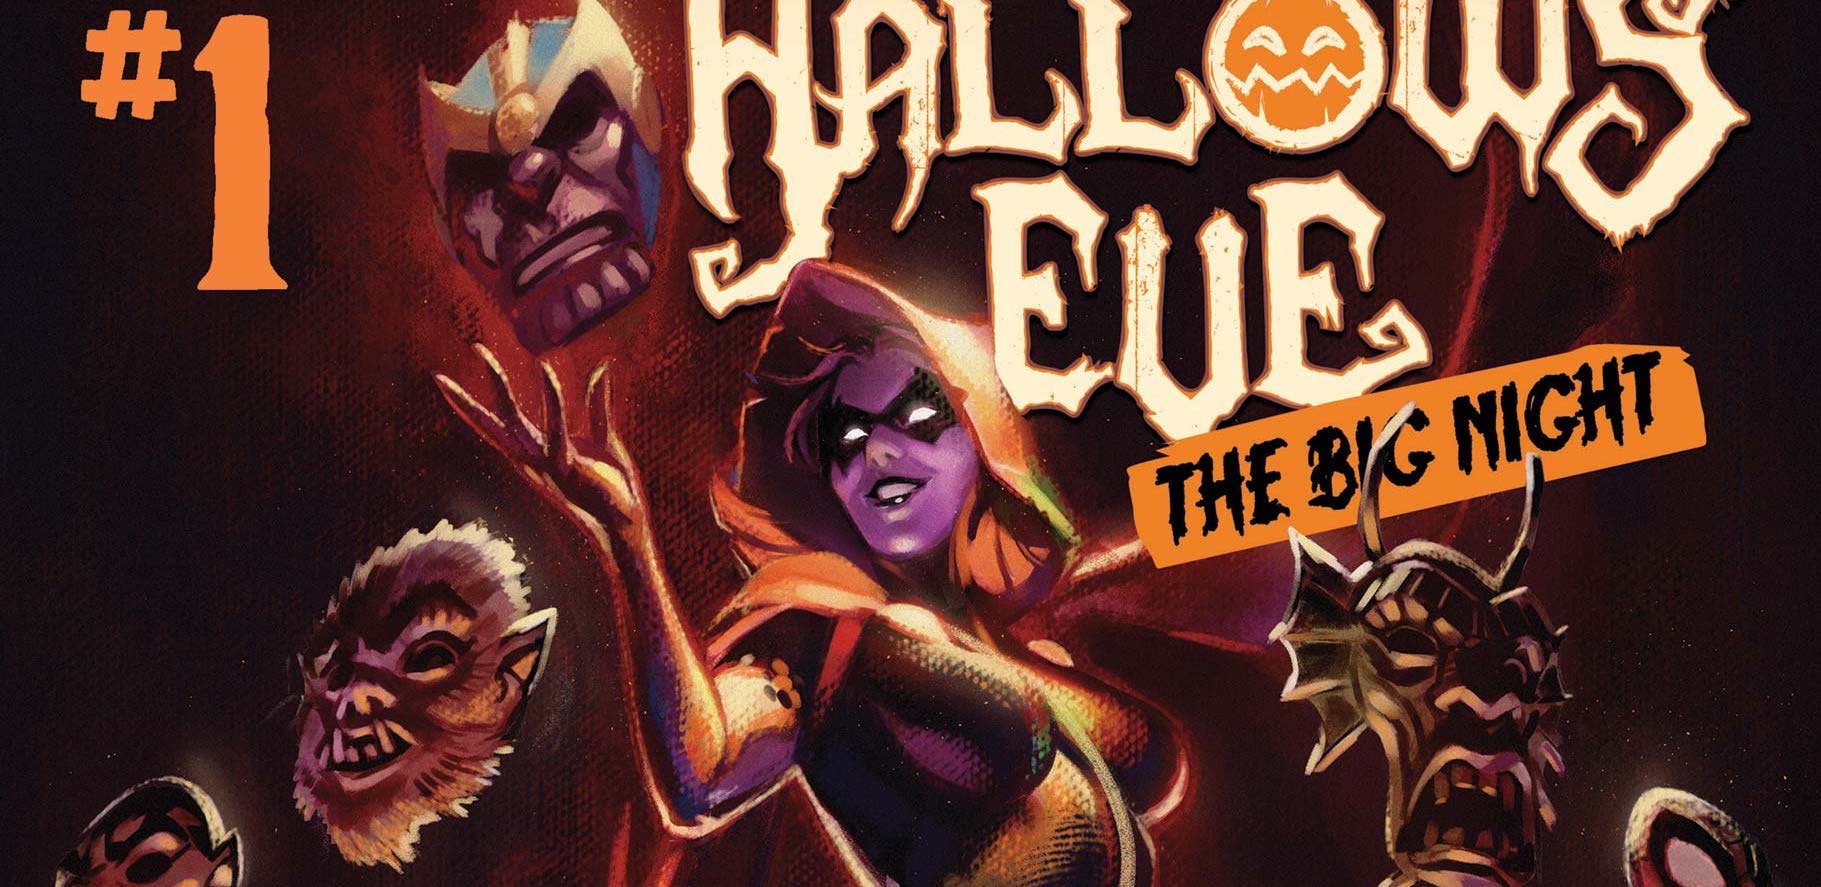 'Hallows’ Eve: The Big Night' #1 is a fun Halloween special